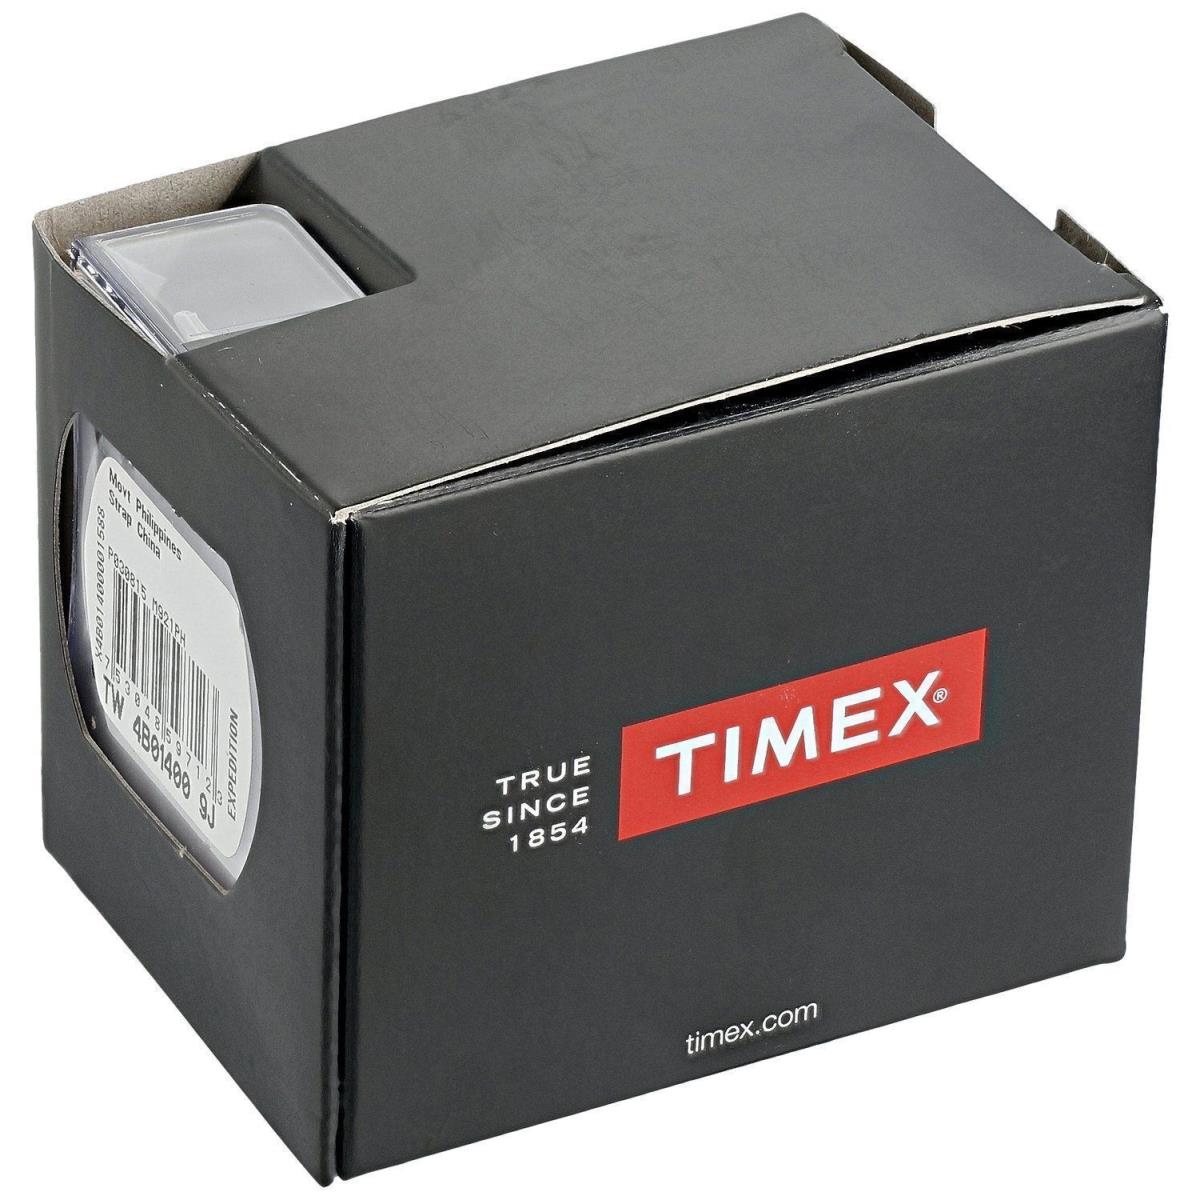 Timex TW4B28700 Mid-size Expedition Chronograph Resin Watch Alarm Indiglo - Dial: Digital, Band: Black